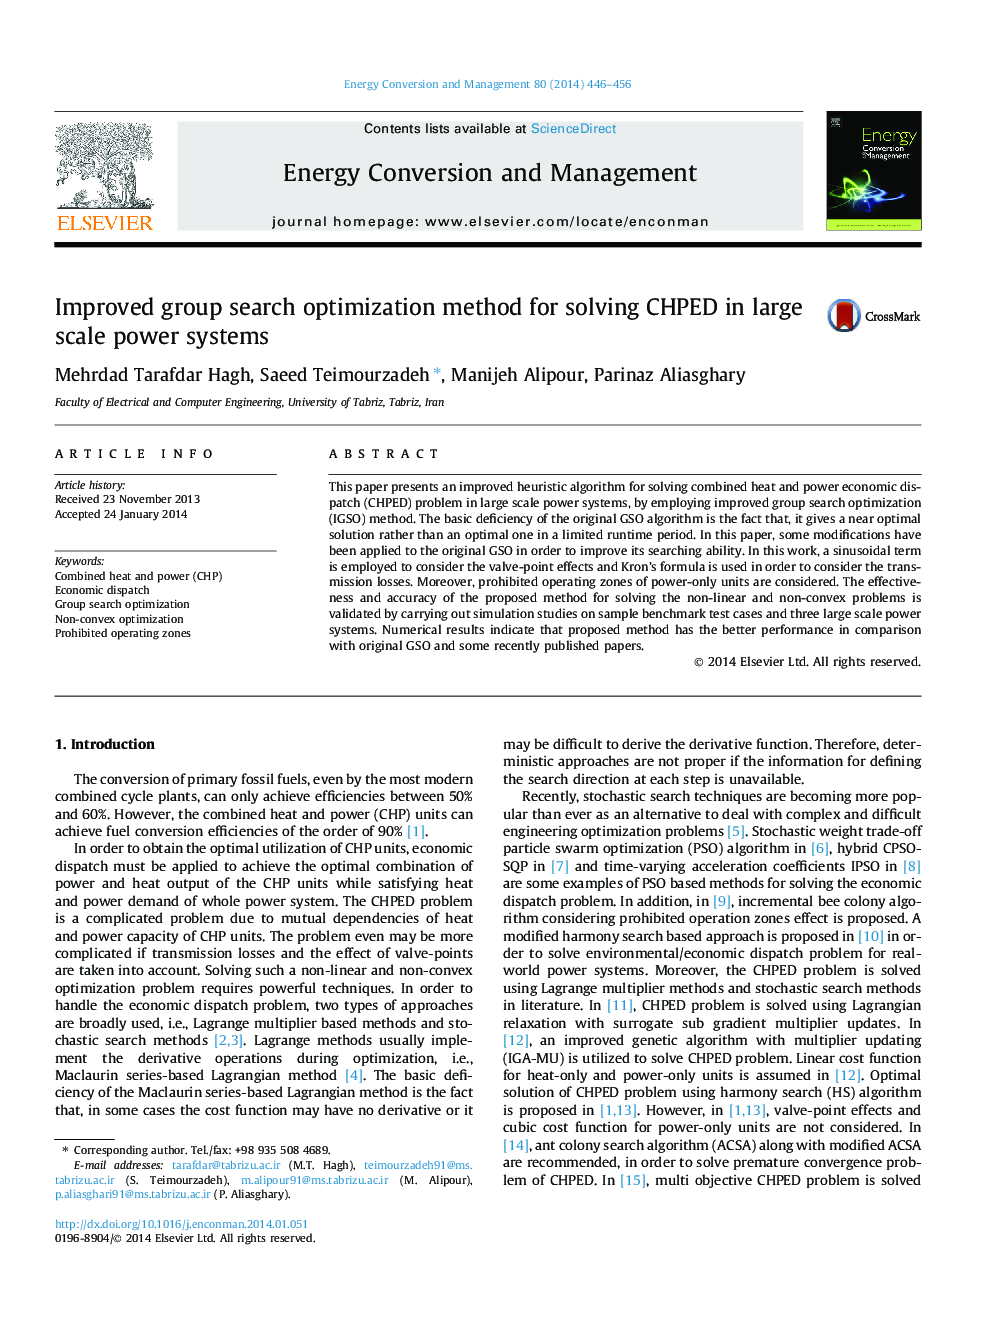 Improved group search optimization method for solving CHPED in large scale power systems